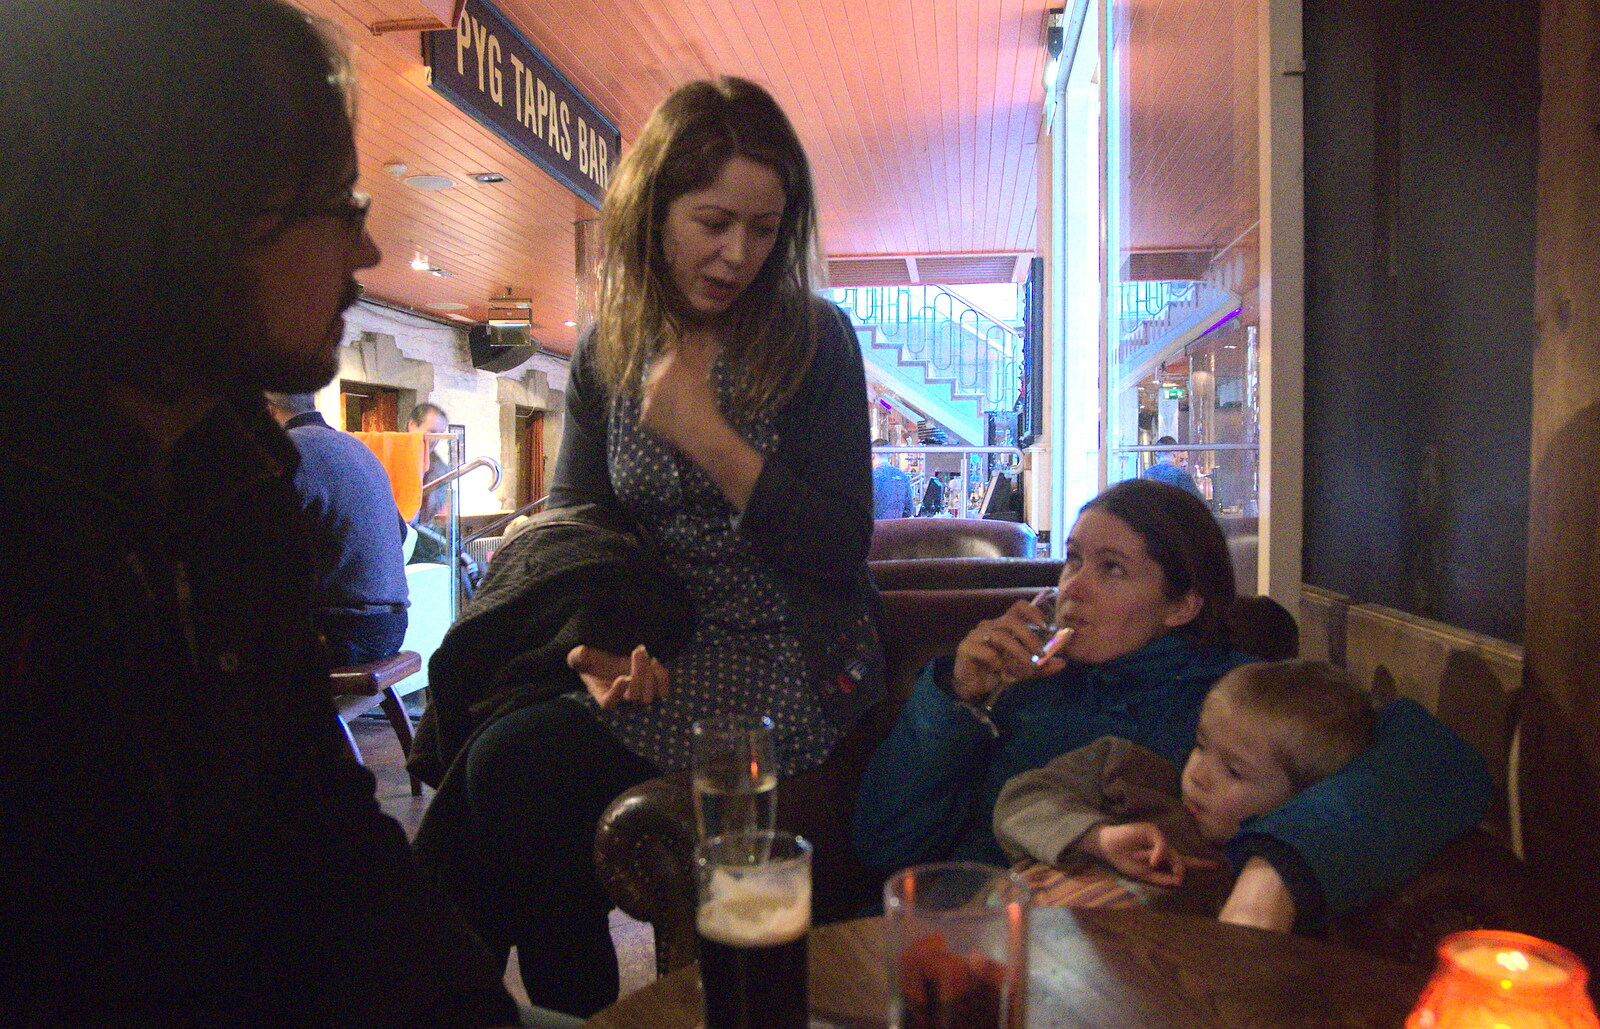 Isobel meets up with some chums in Pygmalion Tapas from Christmas Eve in Dublin and Blackrock, Ireland - 24th December 2015